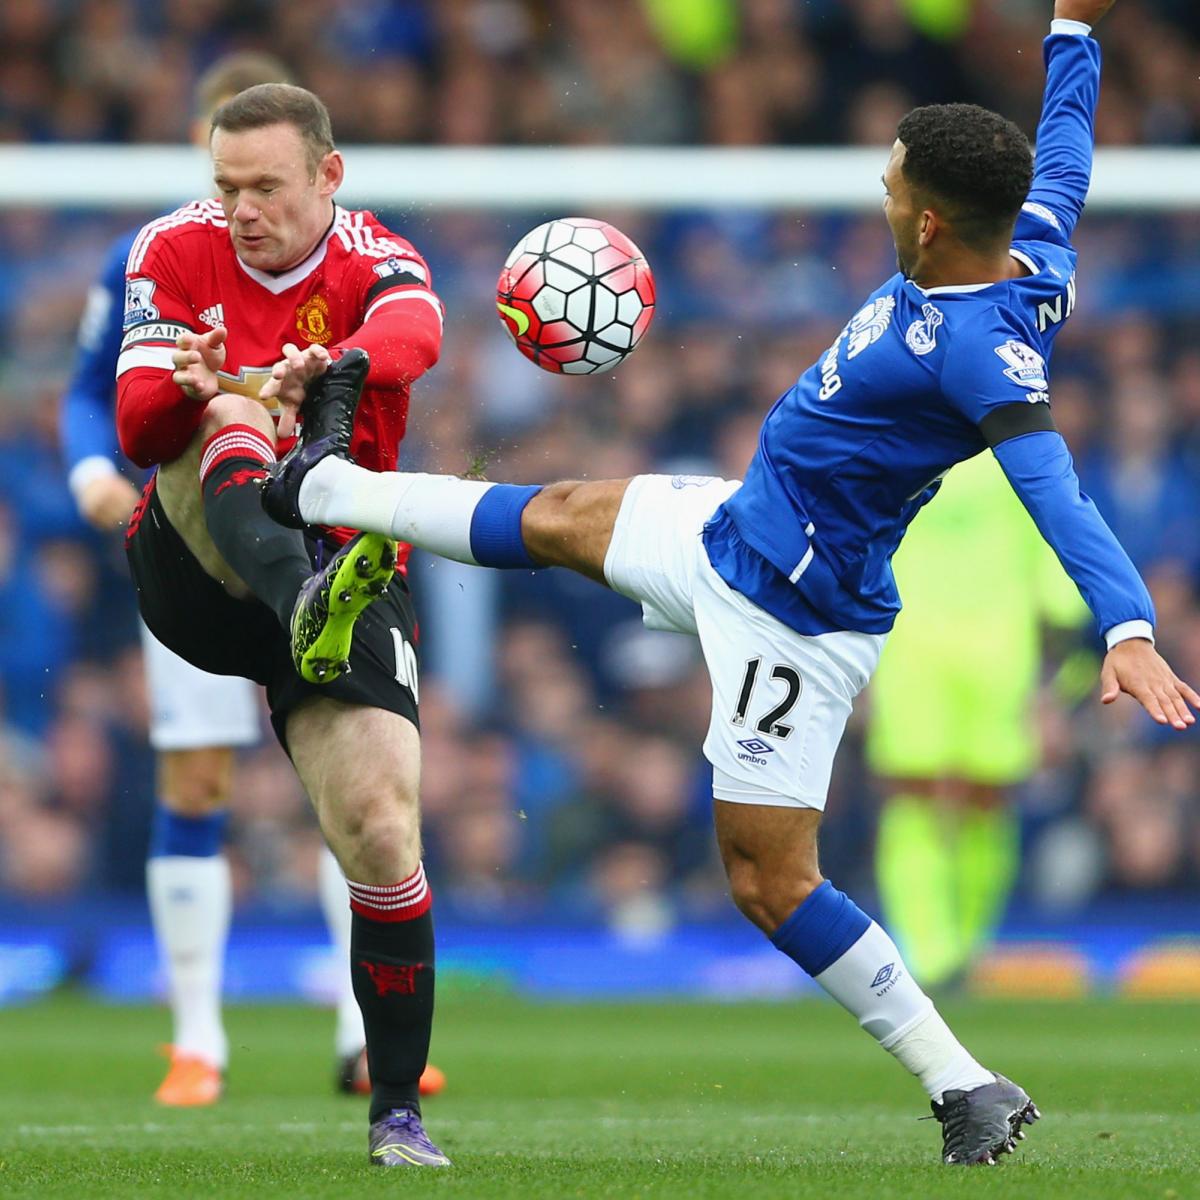 Everton vs. Manchester United: Live Score, Highlights from Premier